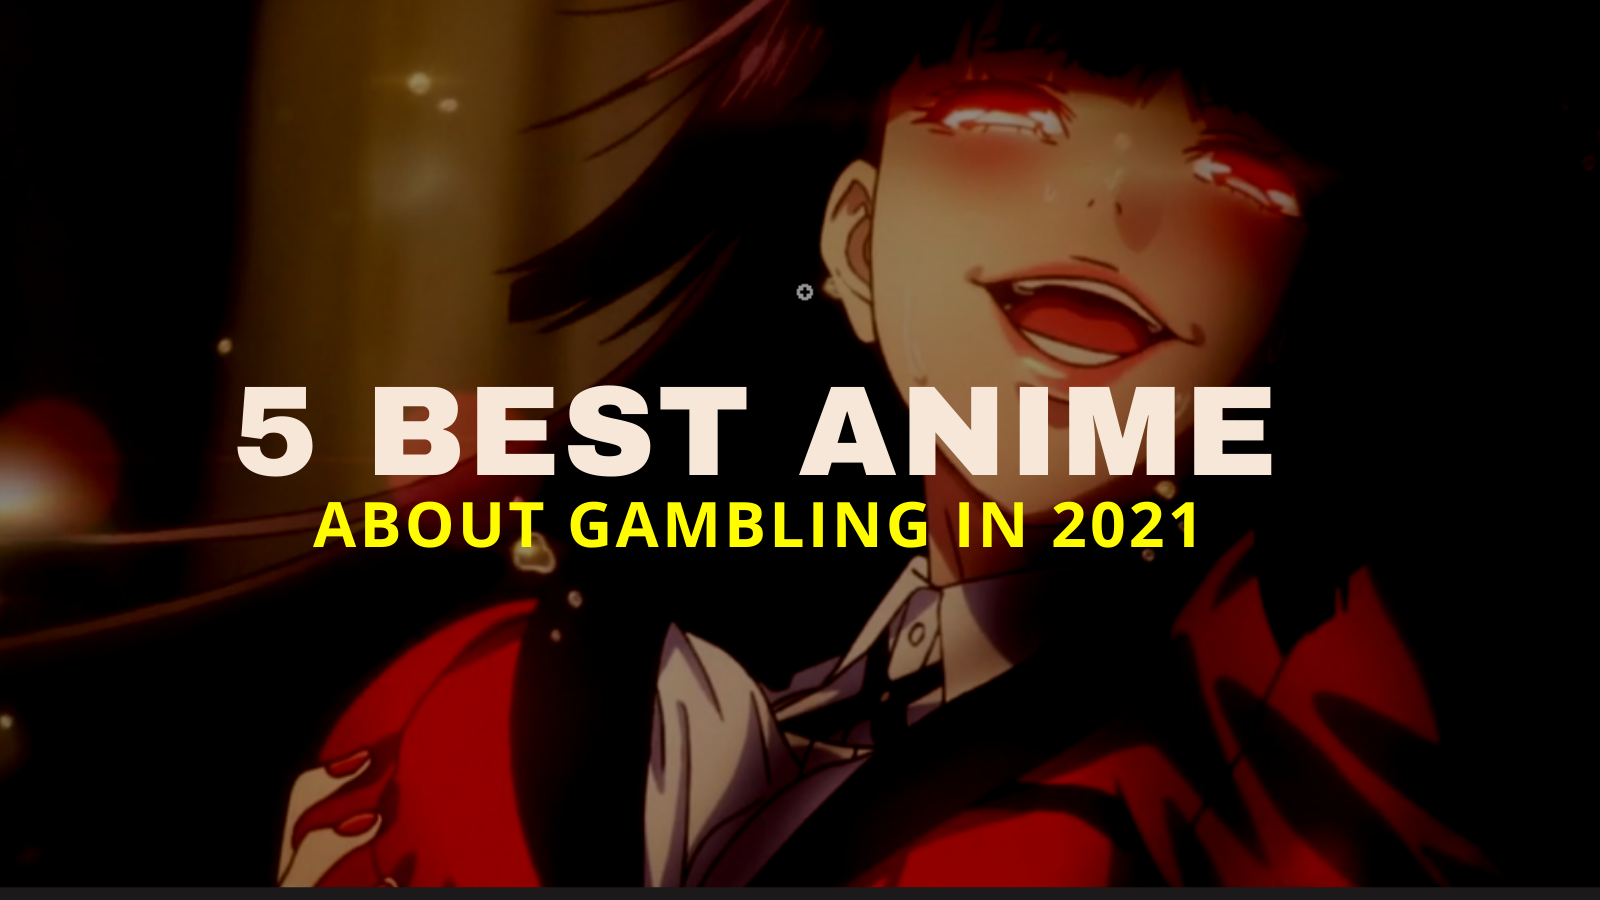 Read more about the article 5 Best Anime About Gambling That You Must Watch in 2021<div class="yasr-vv-stars-title-container"><div class='yasr-stars-title yasr-rater-stars'
                          id='yasr-visitor-votes-readonly-rater-6d0162c355510'
                          data-rating='0'
                          data-rater-starsize='16'
                          data-rater-postid='2654'
                          data-rater-readonly='true'
                          data-readonly-attribute='true'
                      ></div><span class='yasr-stars-title-average'>0 (0)</span></div>